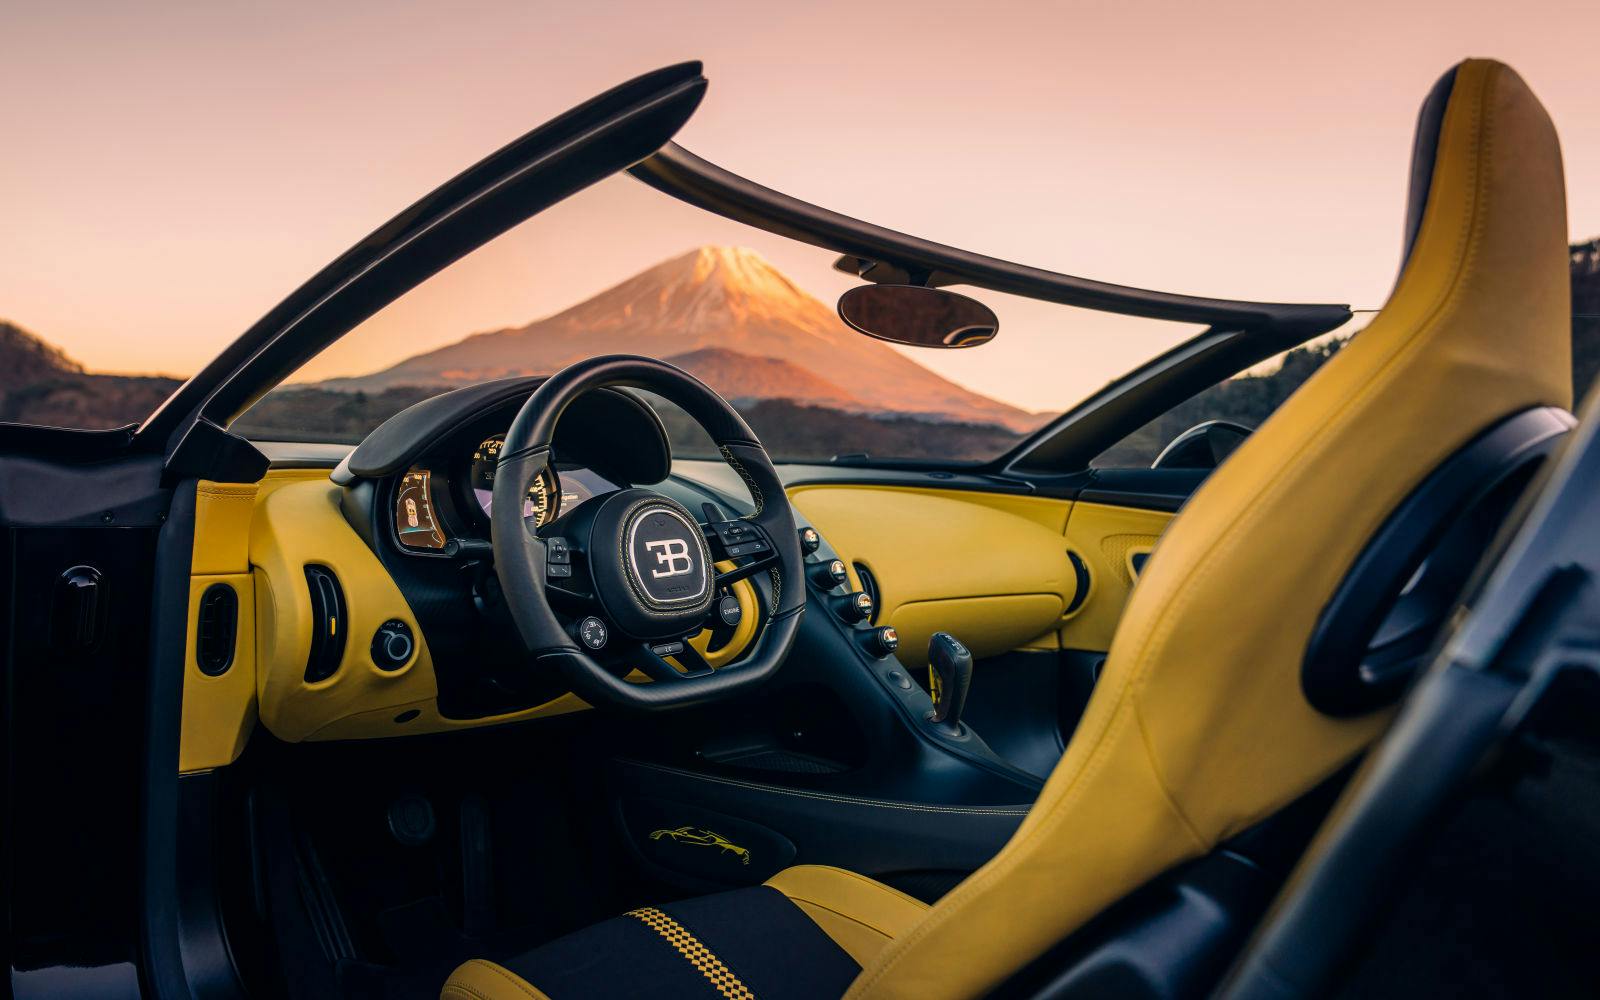 The black and yellow interior of the W16 Mistral is in homage to Ettore Bugatti‘s favourite colors.
